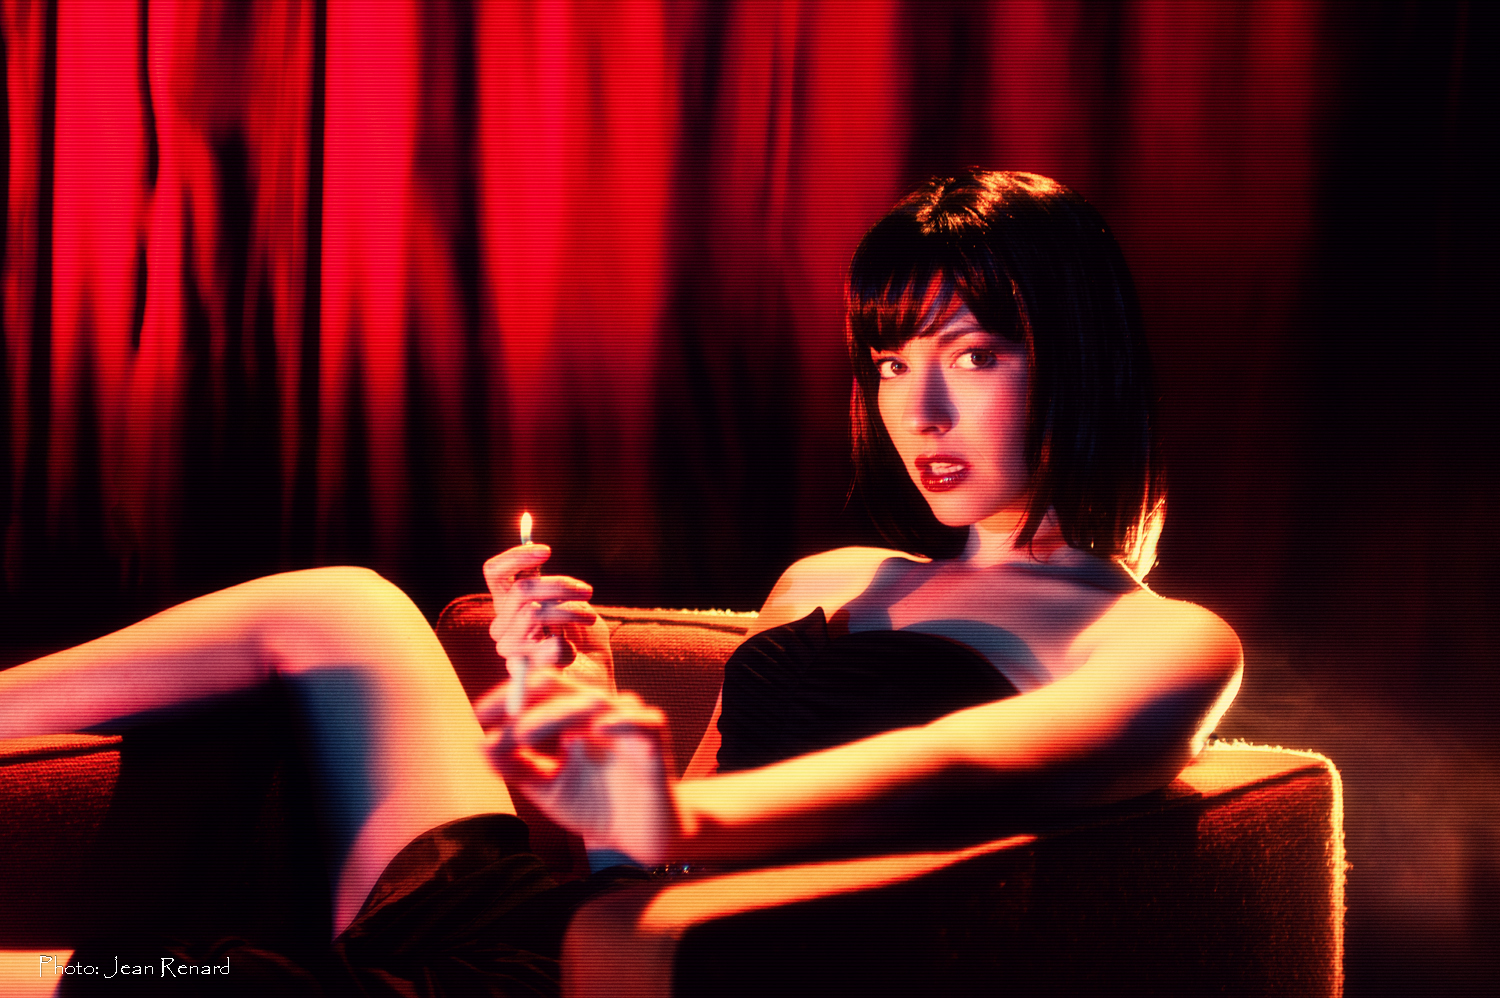 A Chrysta Bell image for the David Lynch produced album "This Train"